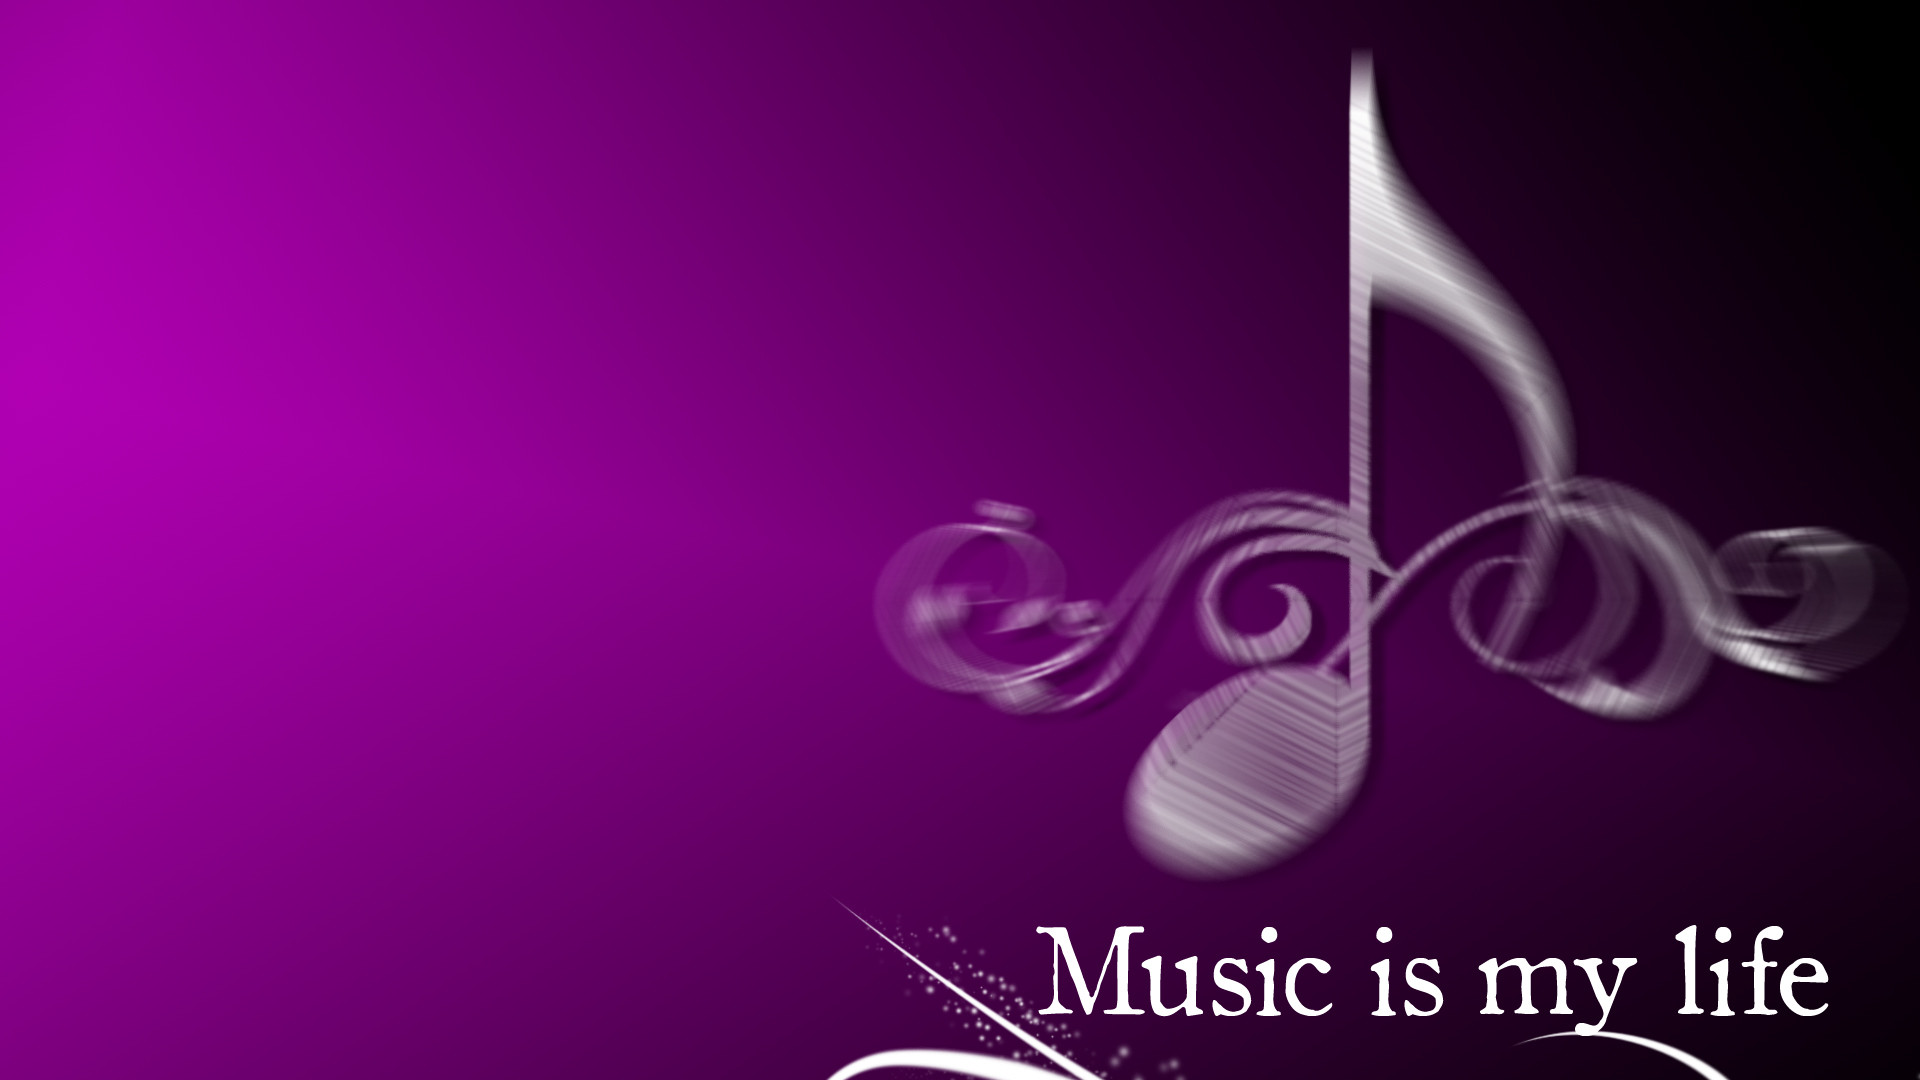 1920x1080 ... Music is my life 2 by MartinCom